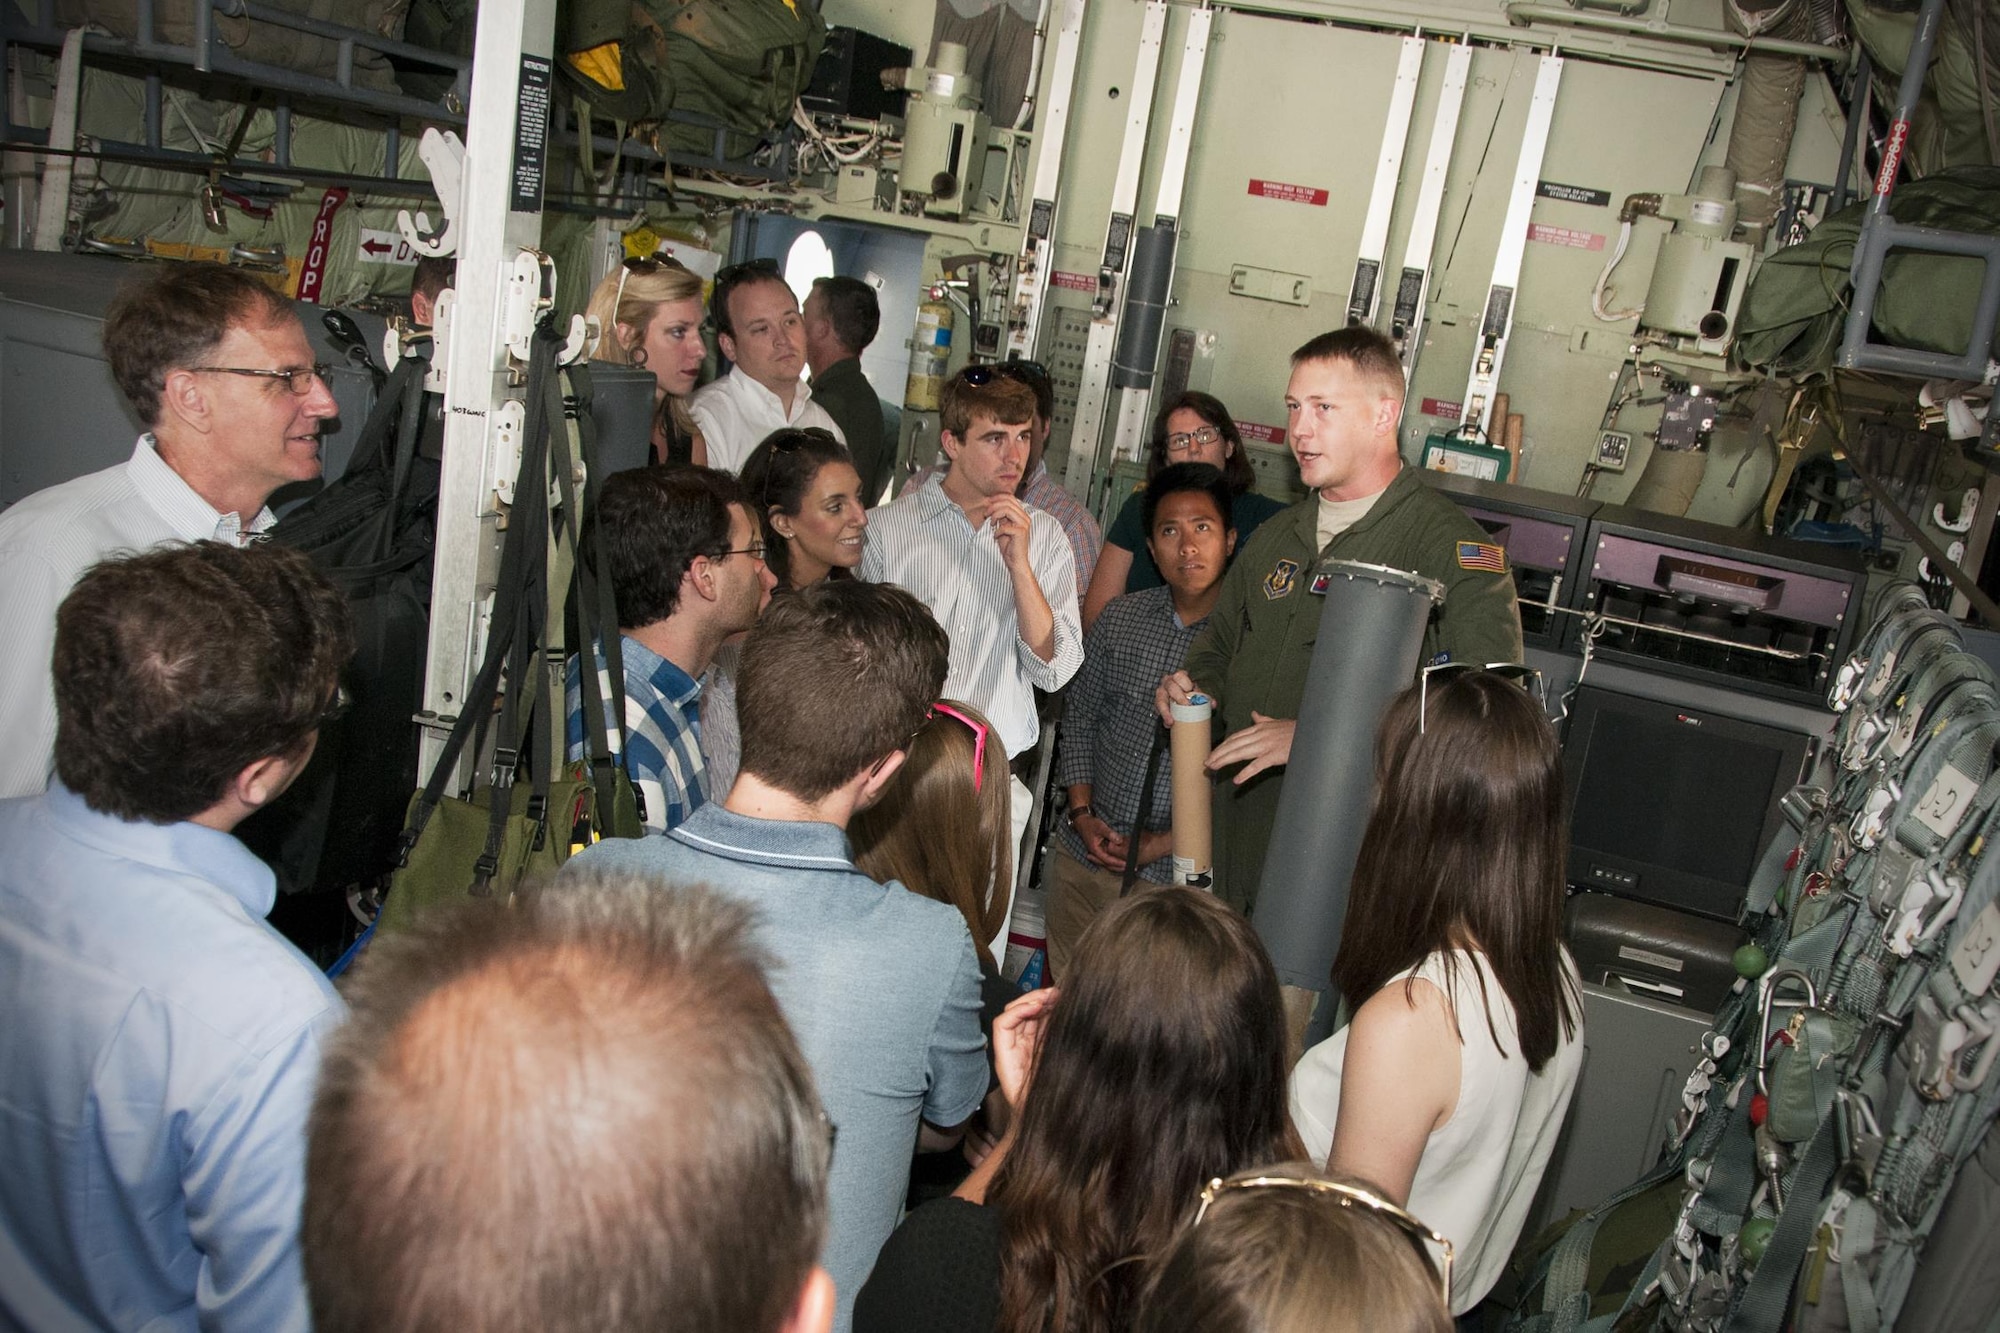 Staff Sgt. Jesse Jordan, 53d Weather Reconnaissance Squadron “Hurricane Hunters” loadmaster, discusses the use and function of a dropsonde tube to a group of congressional staffers inside a C-130 Hercules on the Joint Base Andrews, Md., flight line June 29, 2016. A dropsonde tube is used by the Hurricane Hunters to collect temperature, humidity, wind speed and direction of weather systems. The information is then sent to the National Hurricane Center in Miami to monitor tropical storms. As part of the 100th anniversary of air power in the U.S. military, members of the media were invited to fly with the Hurricane Hunters and learn about their weather surveillance mission. With ten deployable C-130s, the unit has the only routine aerial weather reconnaissance mission in the world. (U.S. Air Force photo/Staff Sgt. Kat Justen)